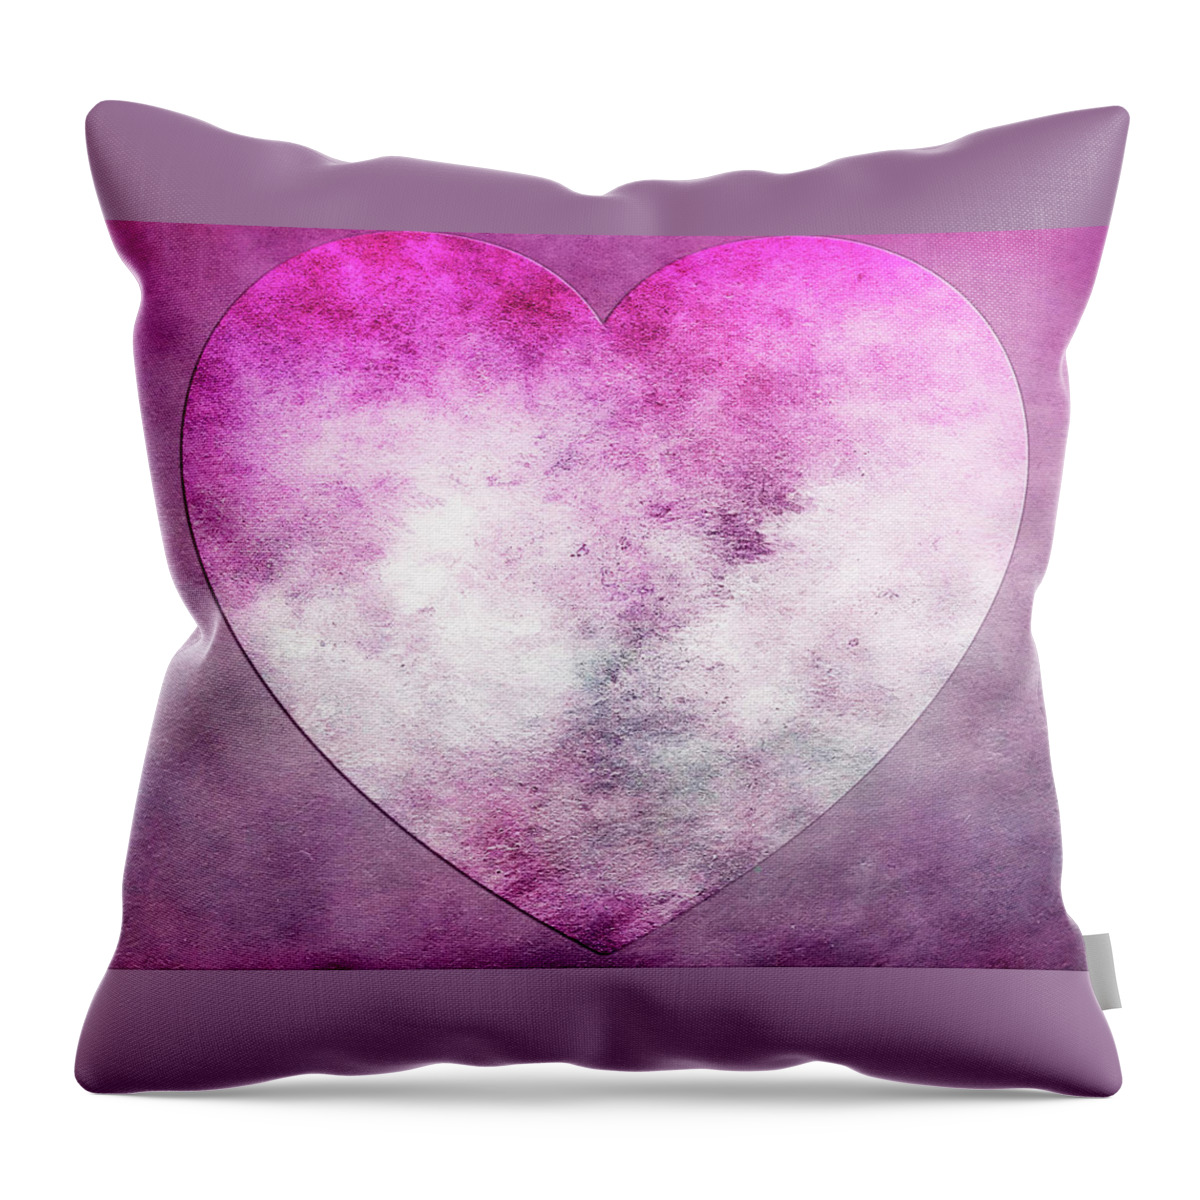 Heart Throw Pillow featuring the mixed media Bruised Heart by Moira Law